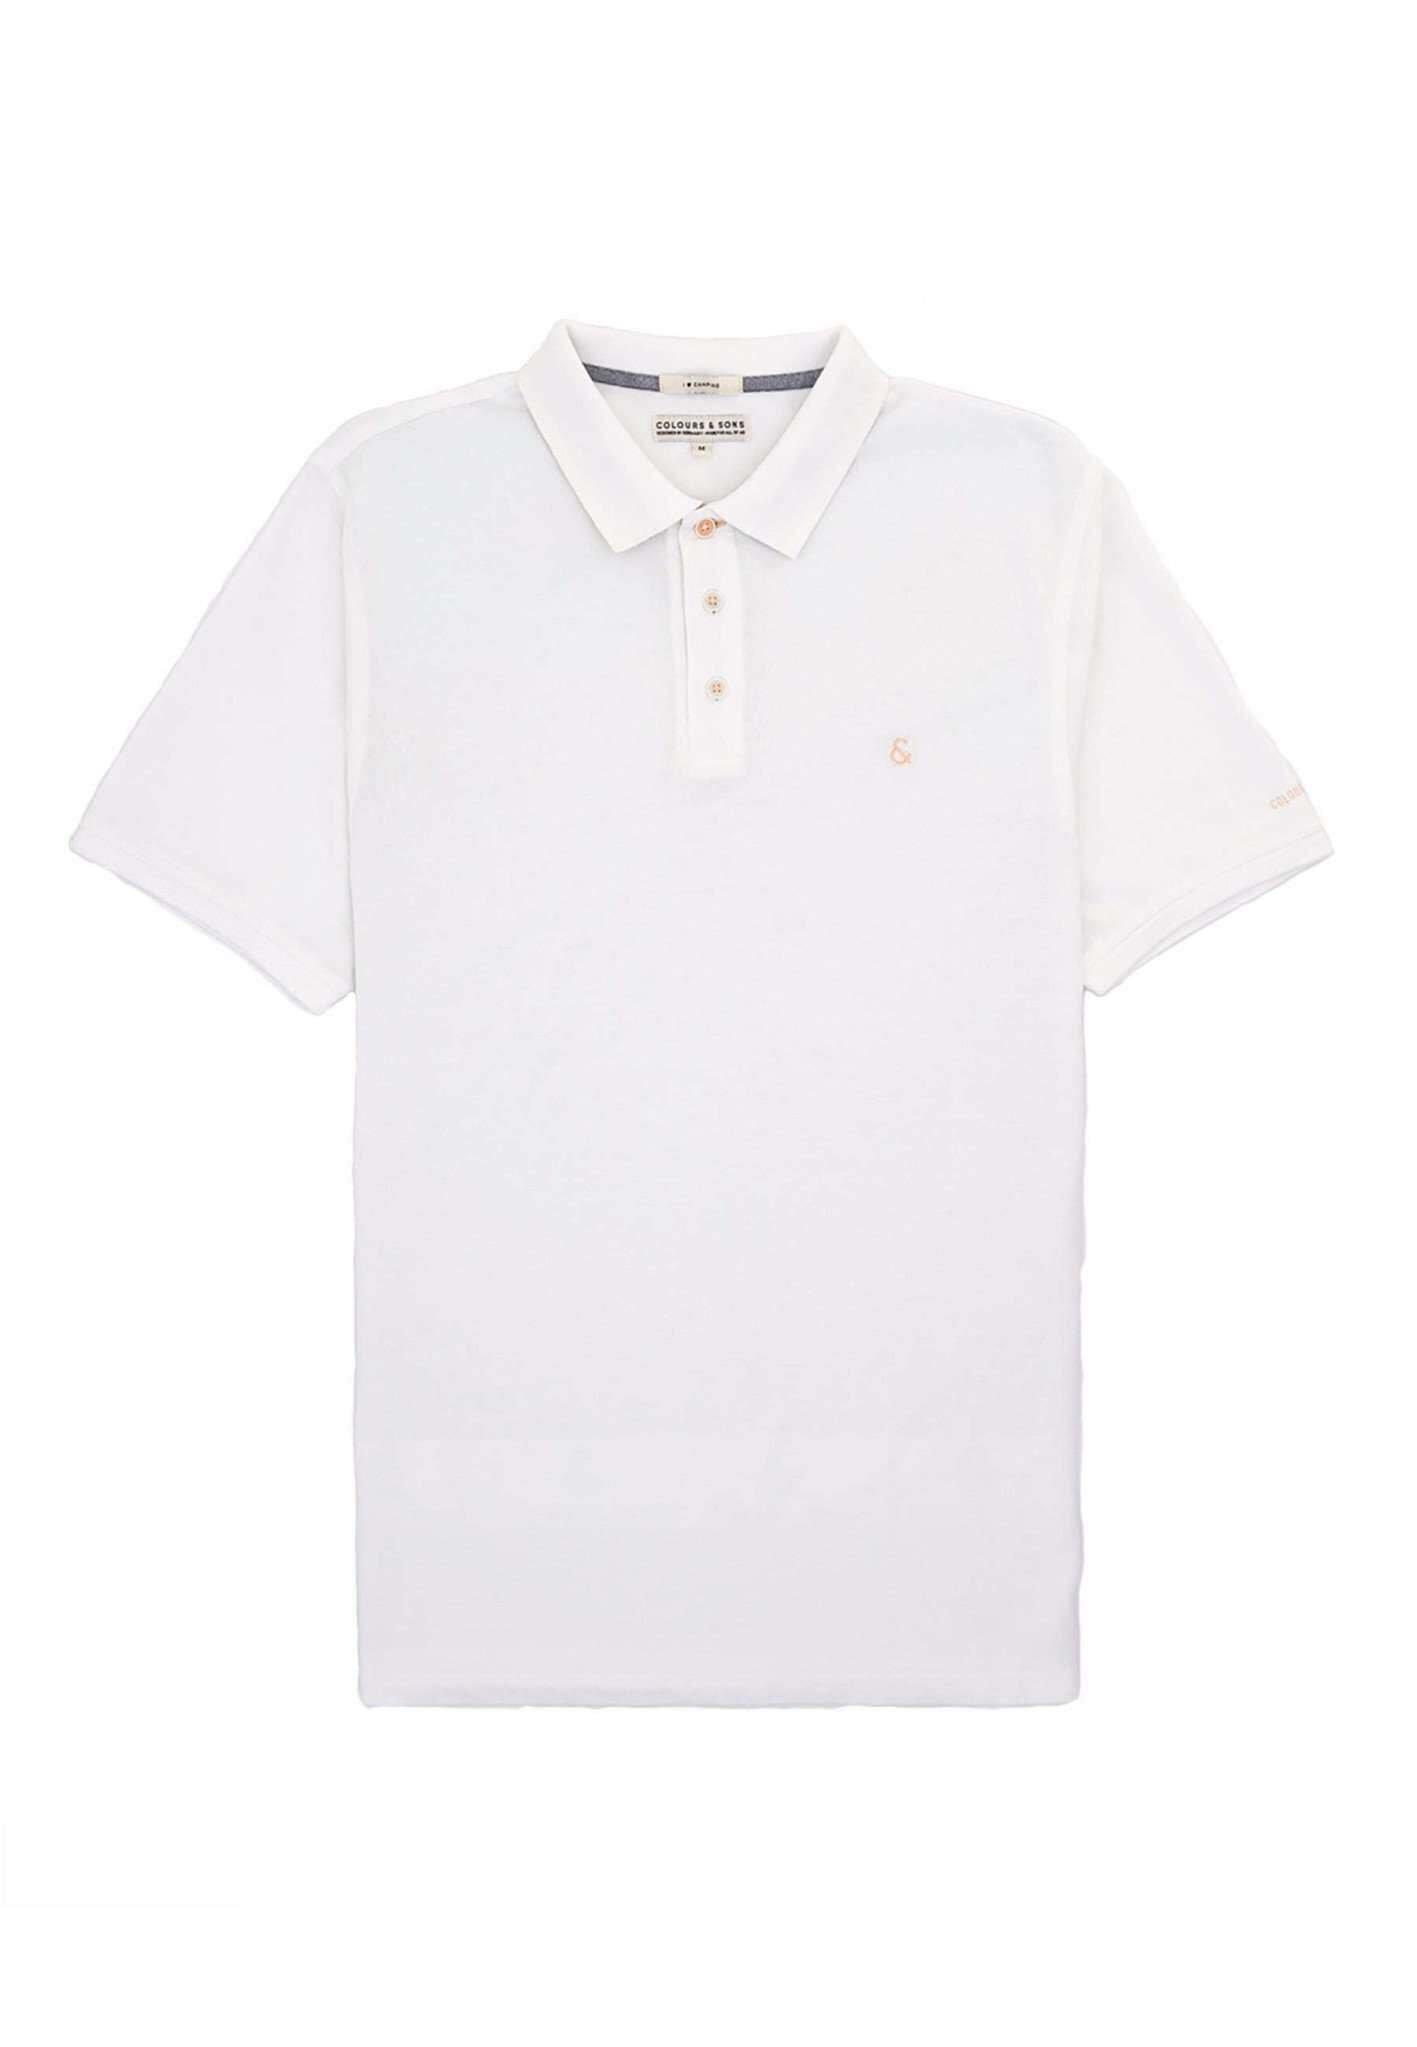 Polos Polo Washed Herren Weiss S von Colours & Sons